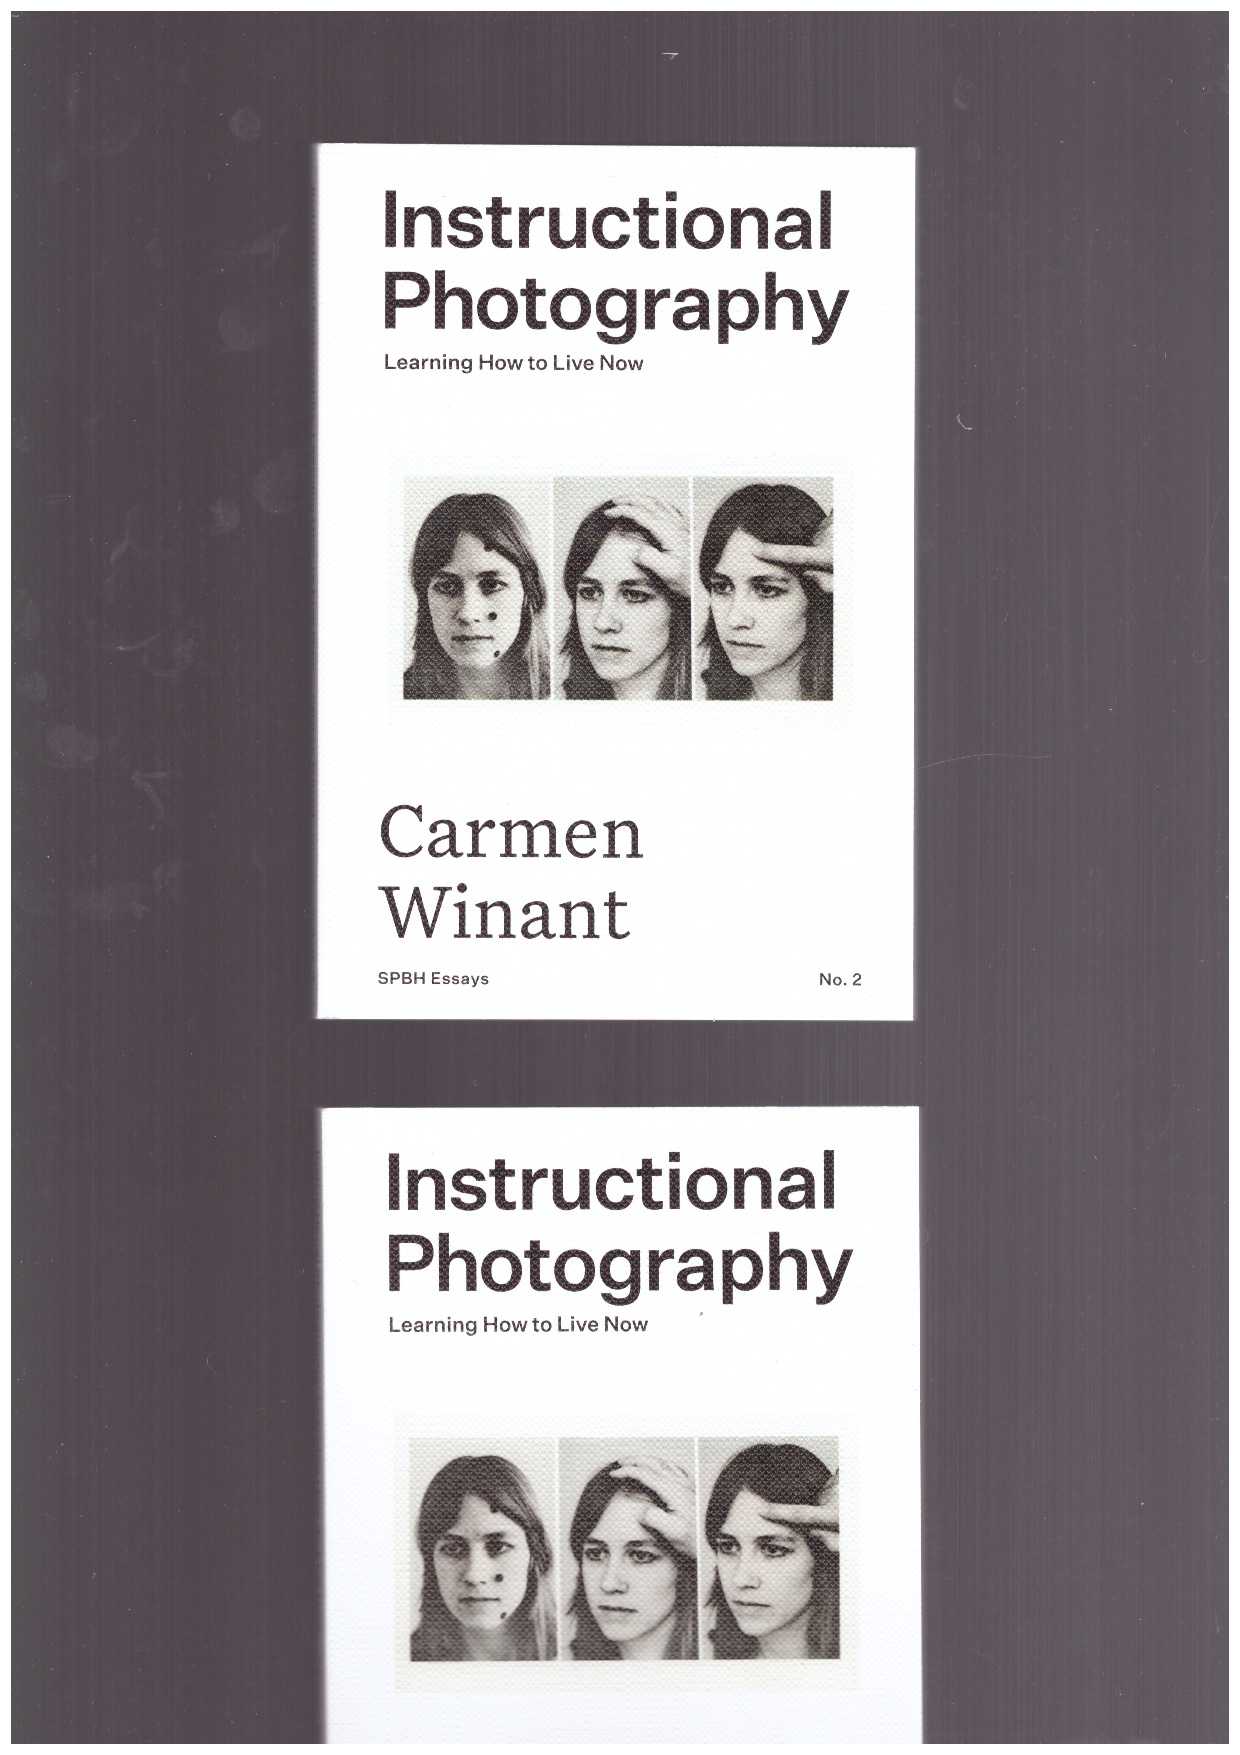 WINANT, Carmen - Instructional Photography: Learning How to Live Now